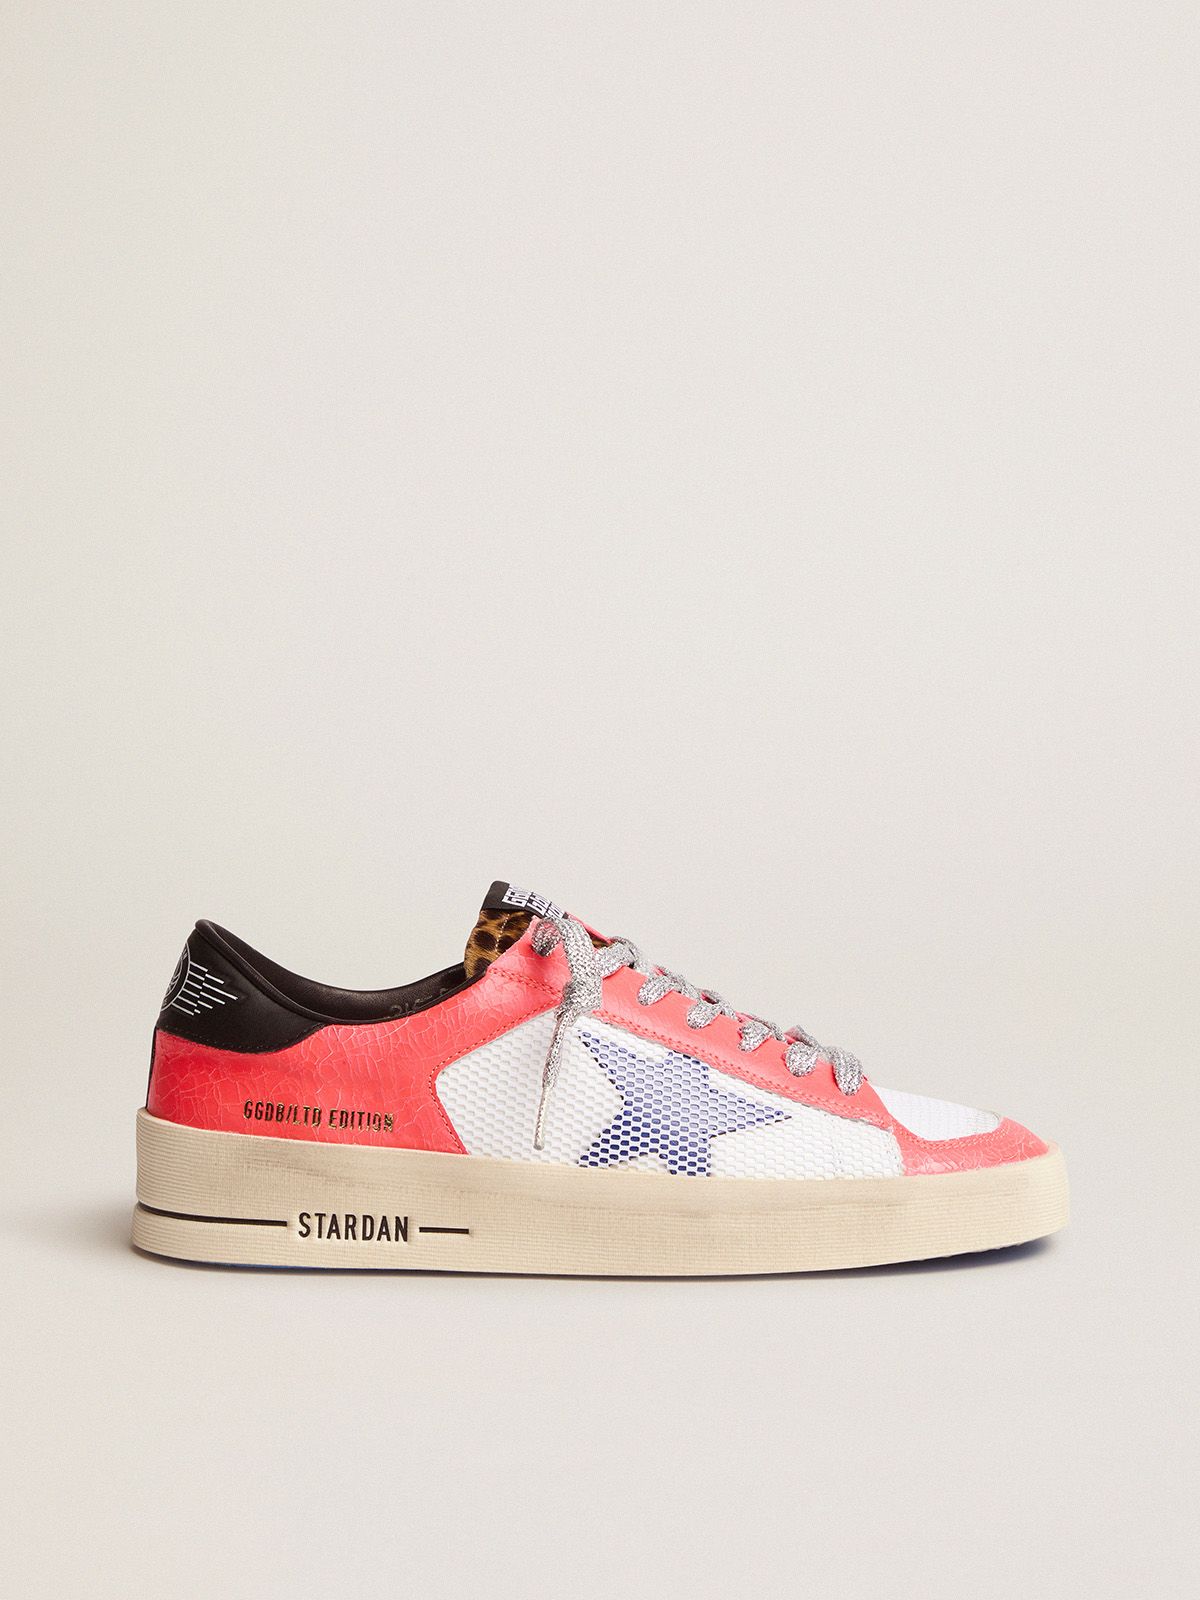 golden goose pony Limited Stardan leather and LAB in sneakers craquelé Edition Women's skin